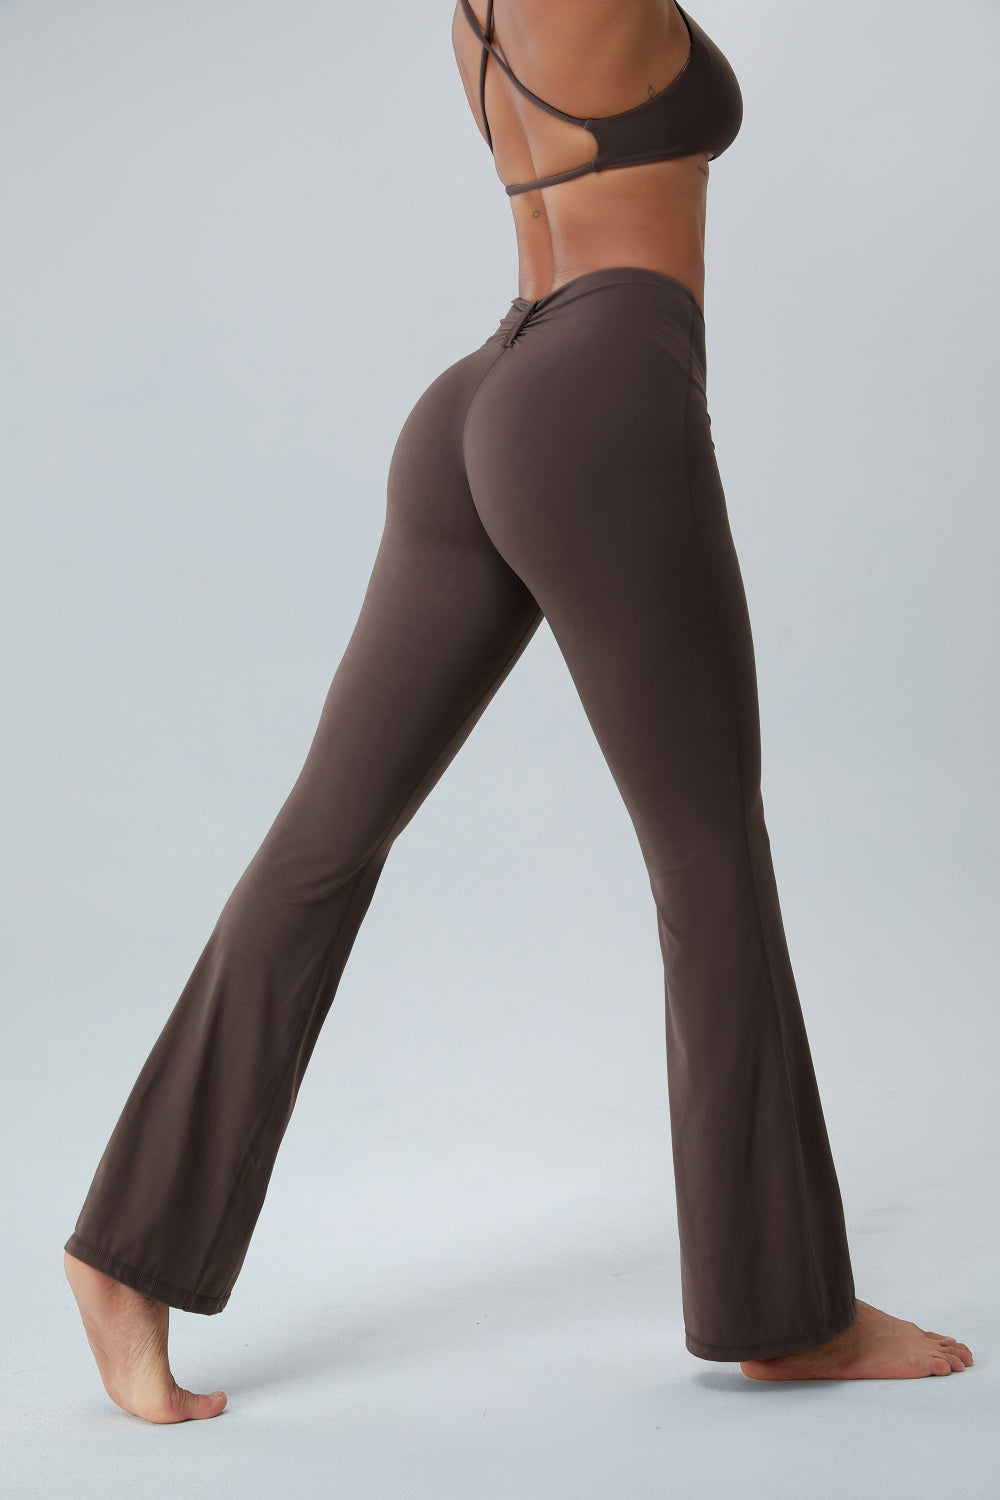 Ruched High Waist Active leggings